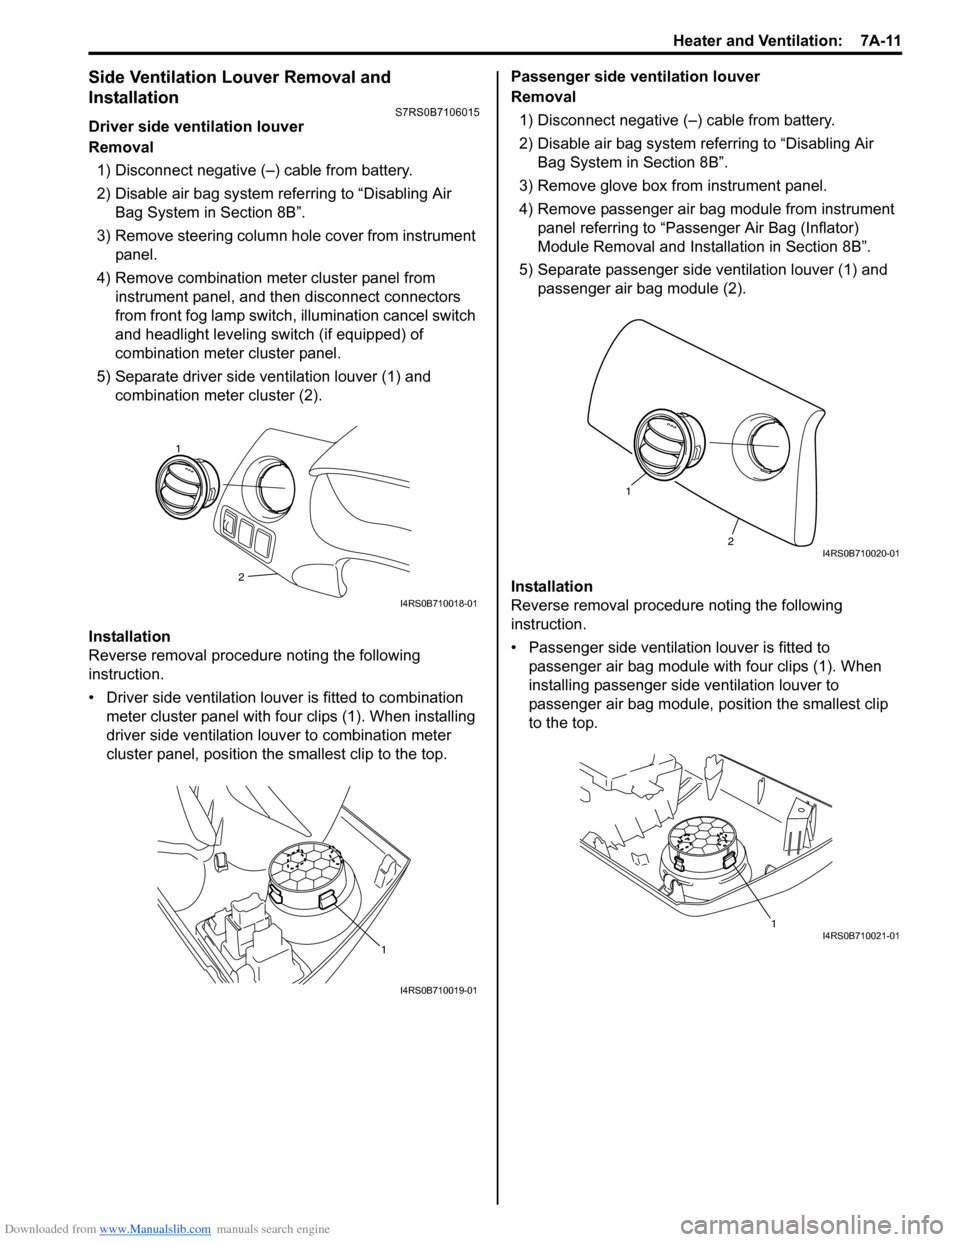 SUZUKI SWIFT 2004 2.G Service Workshop Manual Downloaded from www.Manualslib.com manuals search engine Heater and Ventilation:  7A-11
Side Ventilation Louver Removal and 
Installation
S7RS0B7106015
Driver side ventilation louver
Removal1) Disconn